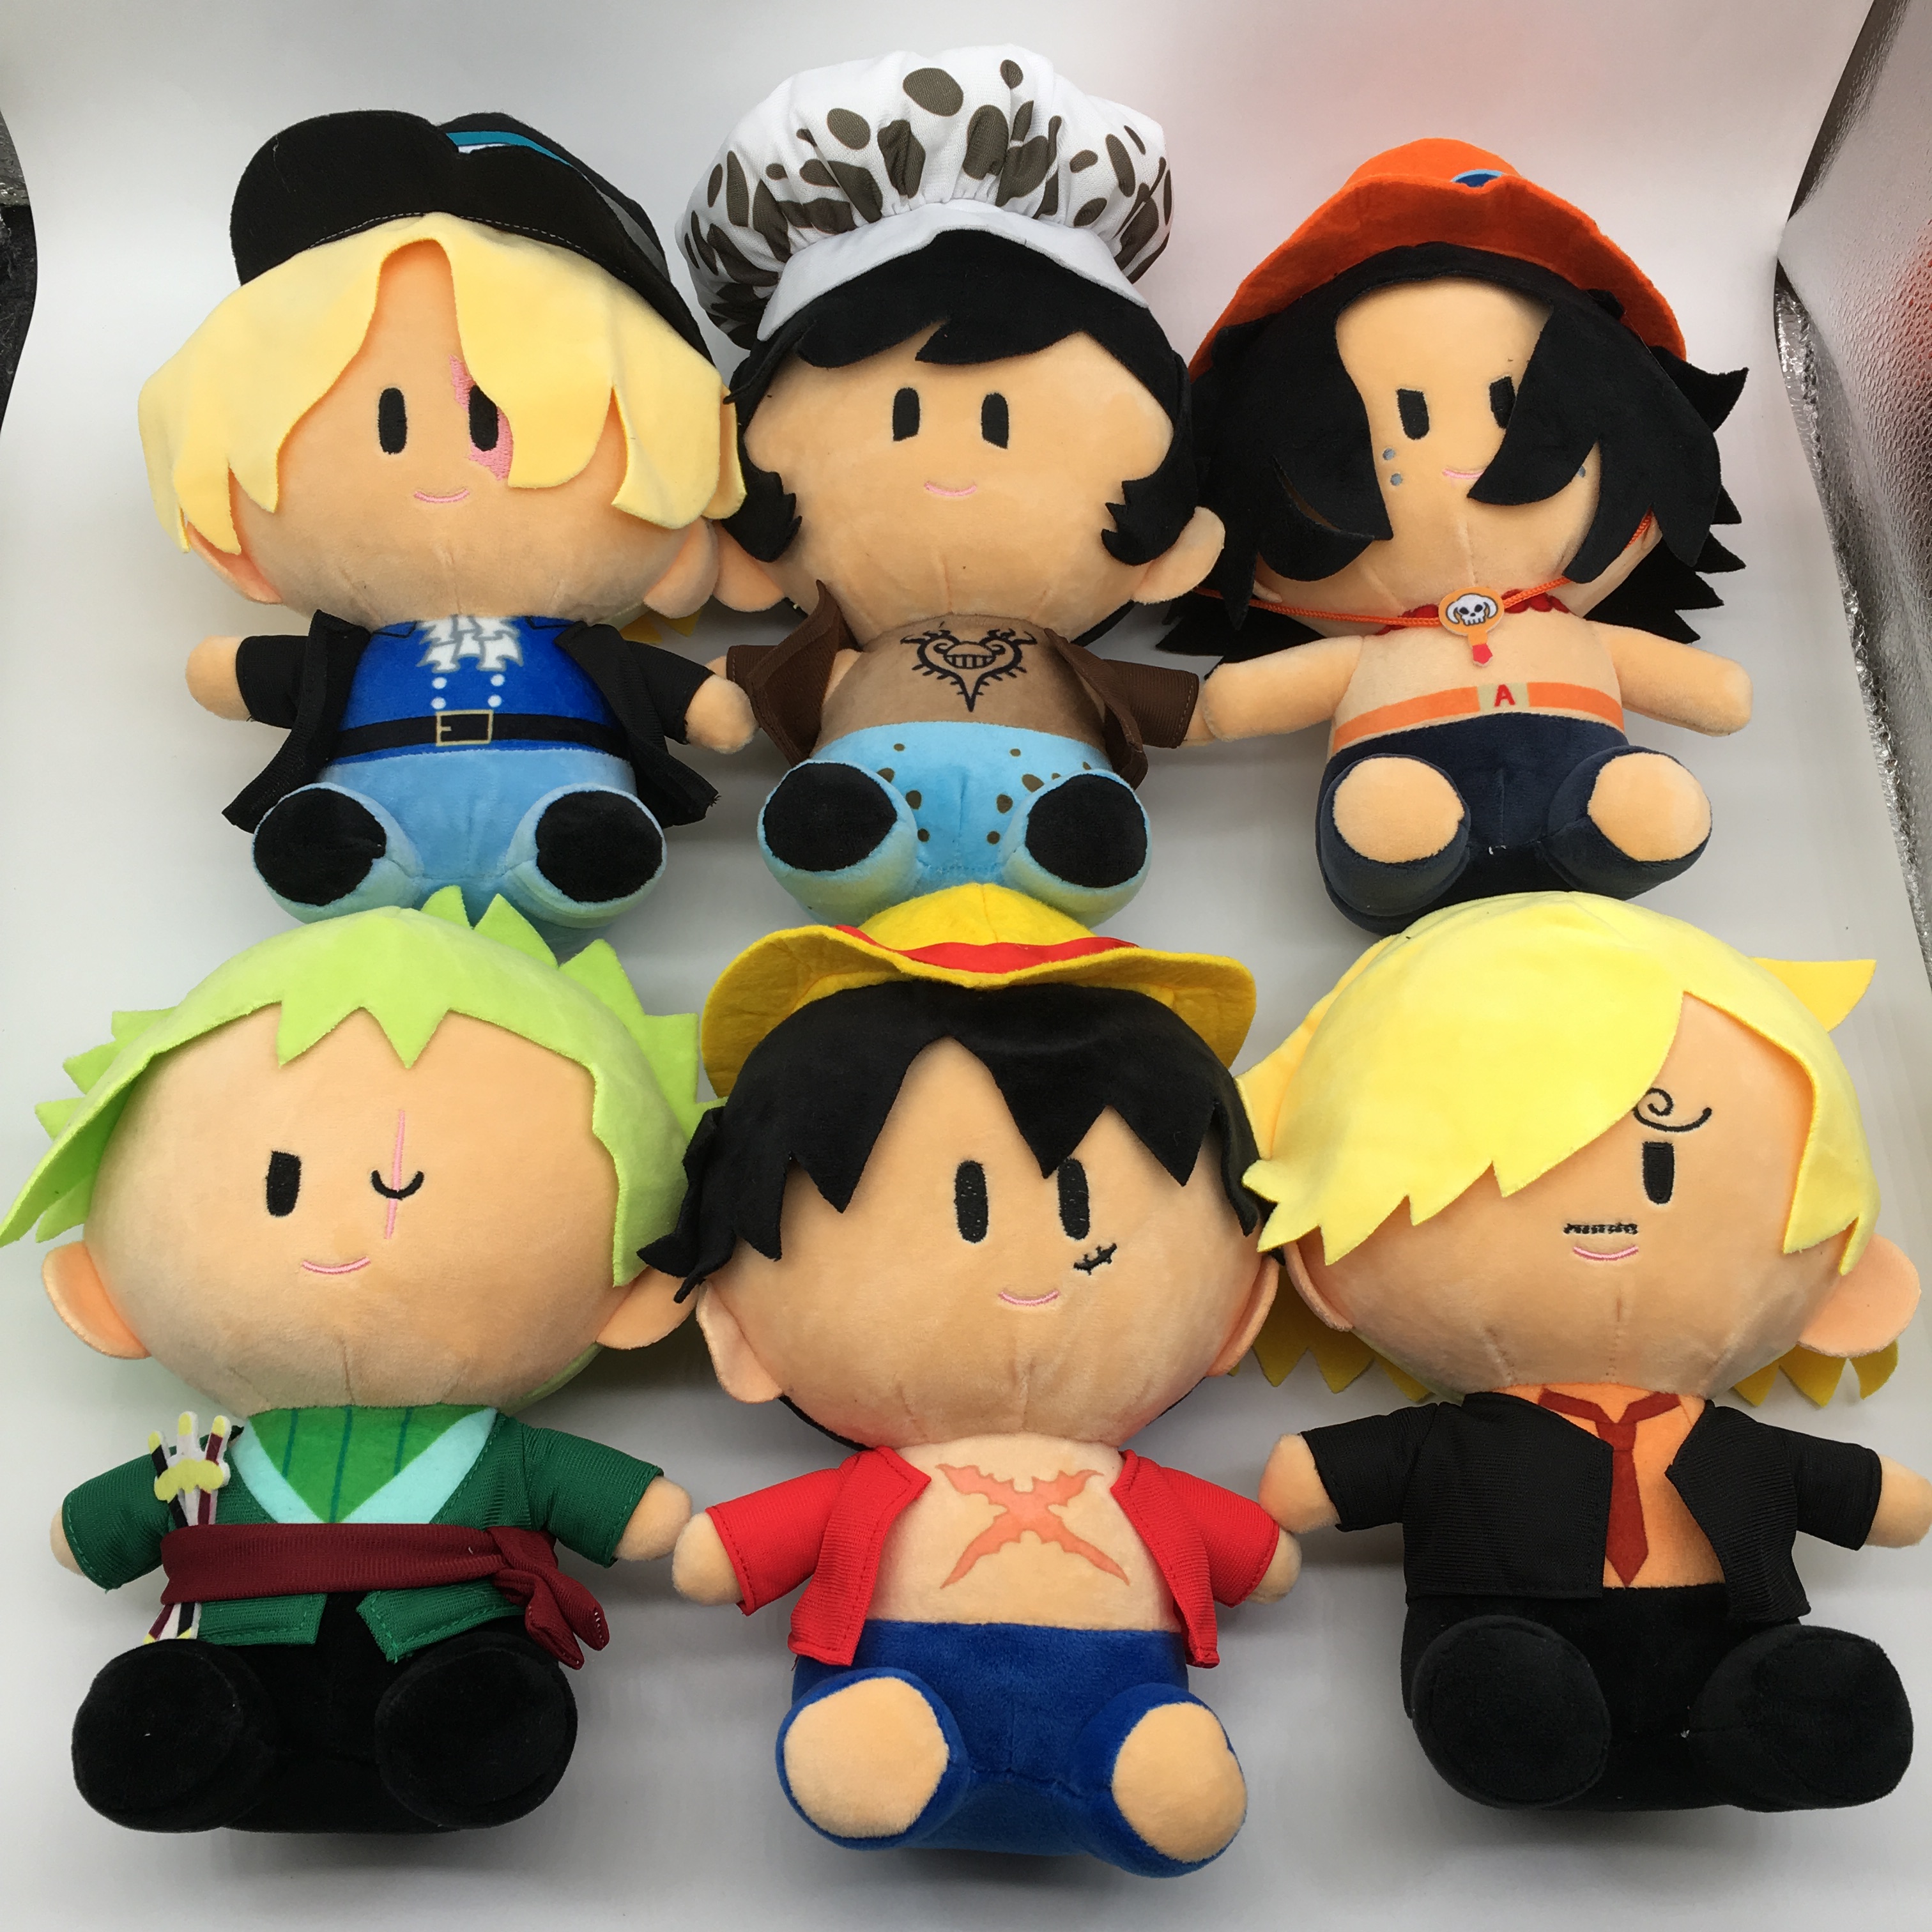 One piece anime plush Toy，price for a set ofr 6 pcs,25cm